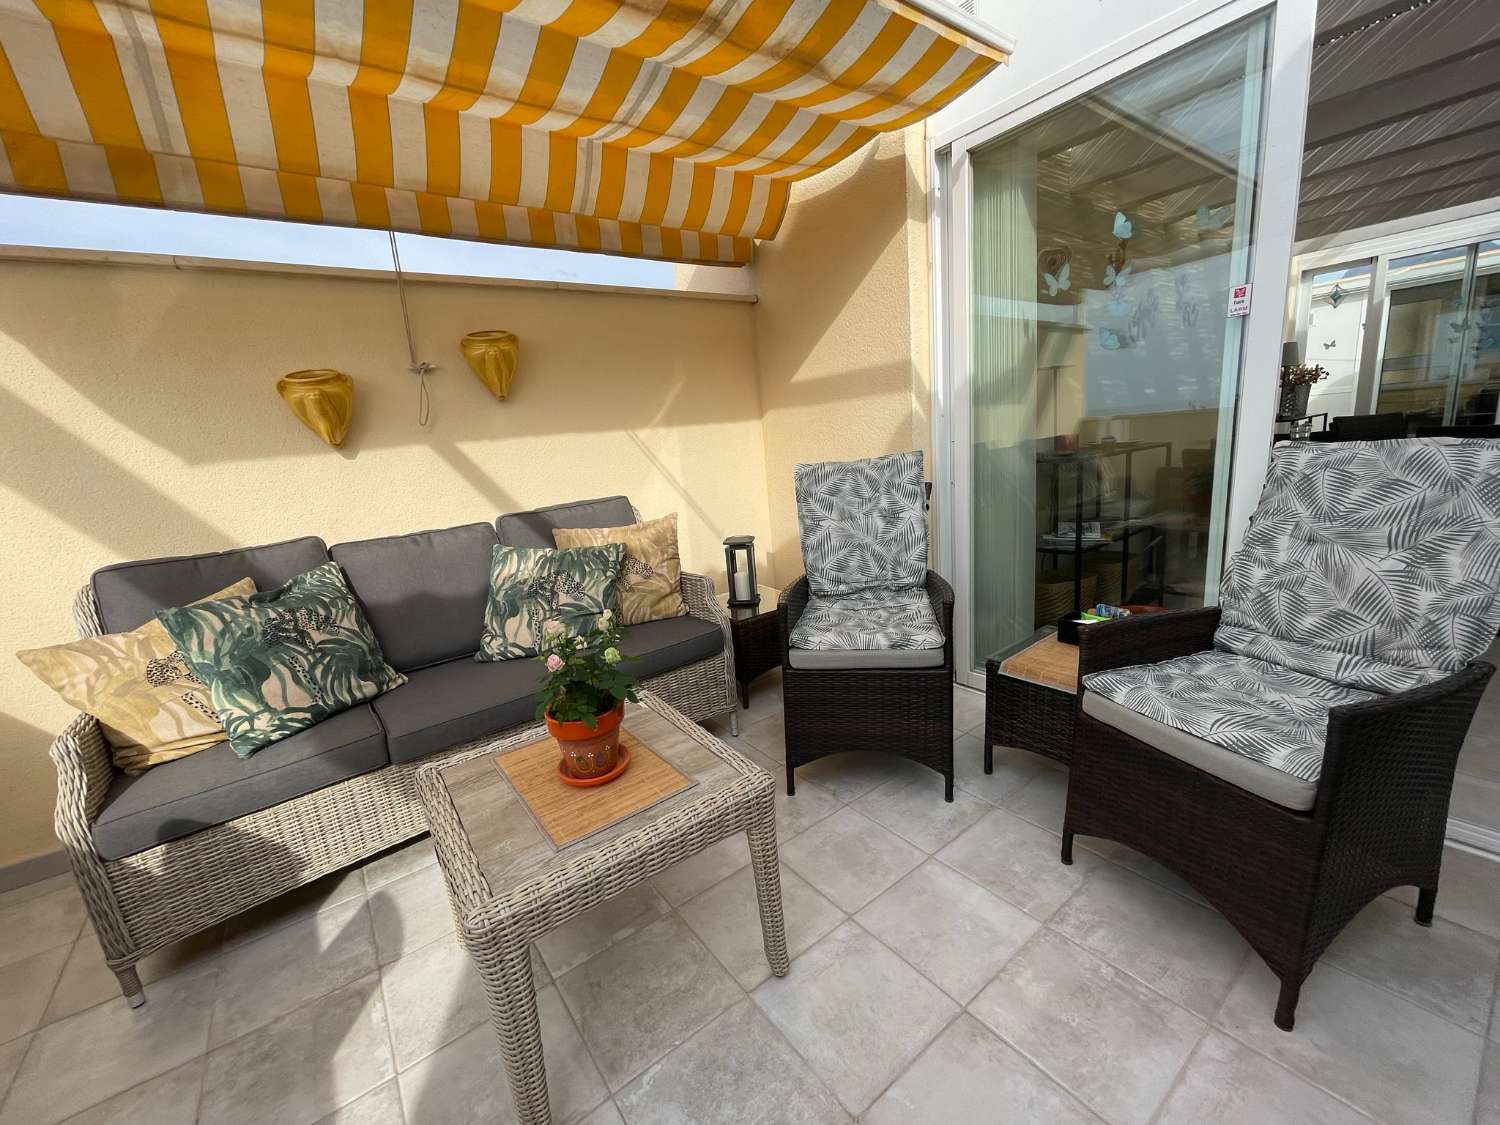 Two-bedroom penthouse for sale in the Torrecilla area, Nerja